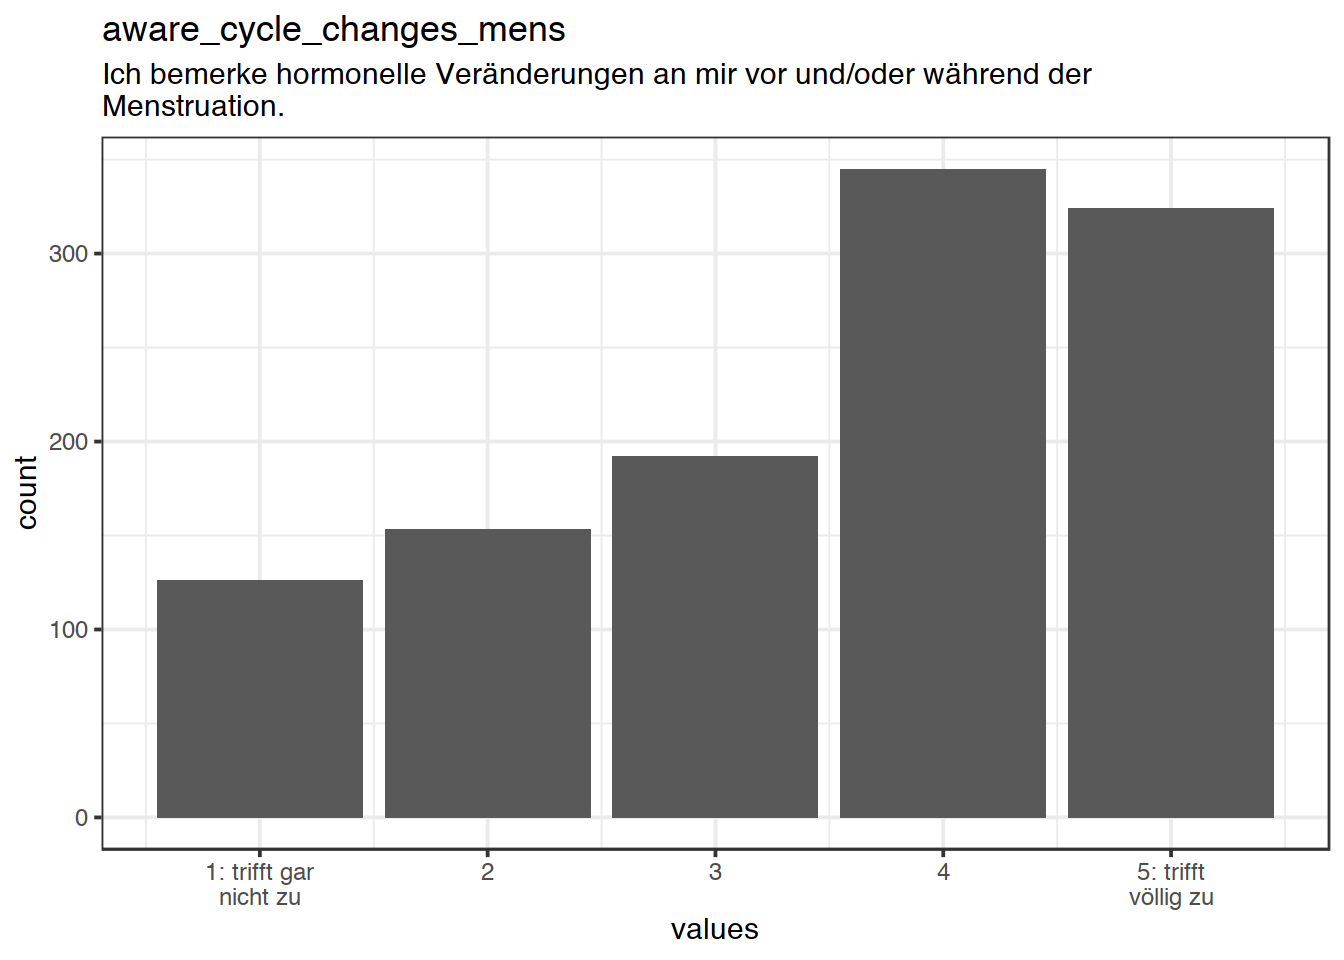 Distribution of values for aware_cycle_changes_mens